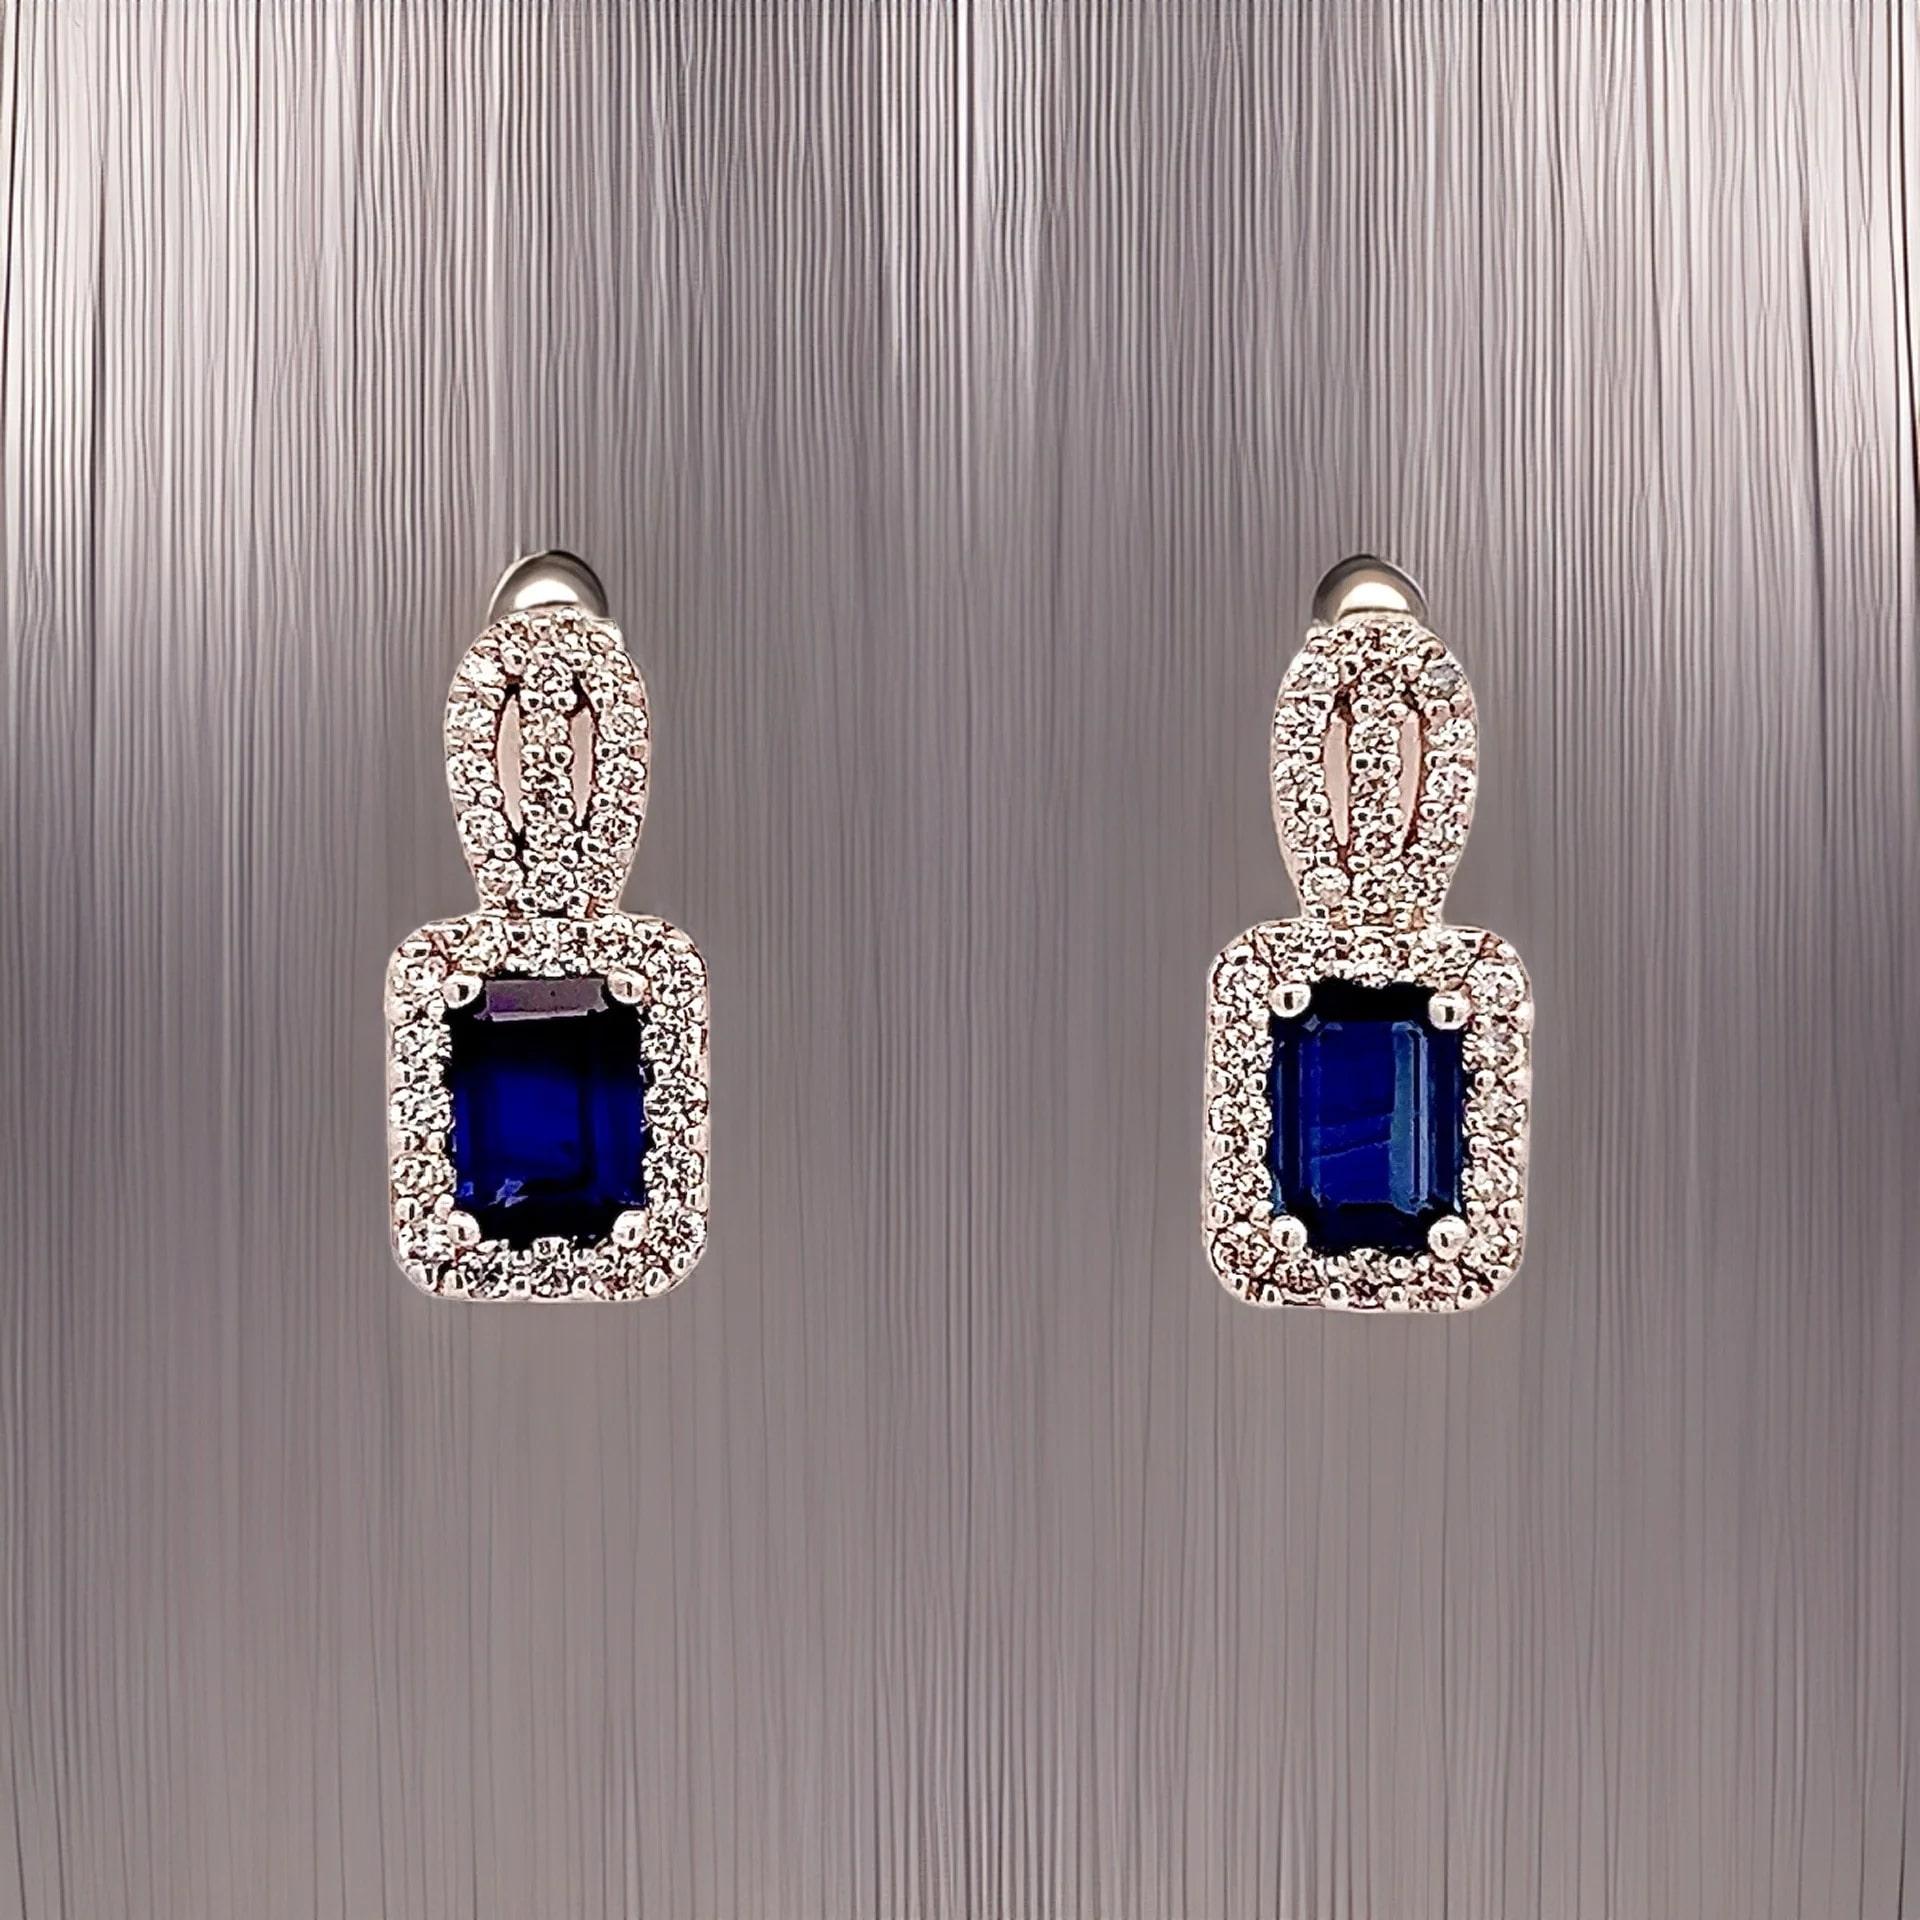 Natural Sapphire Diamond Earrings 14k W Gold 2.84 TCW Certified  For Sale 6